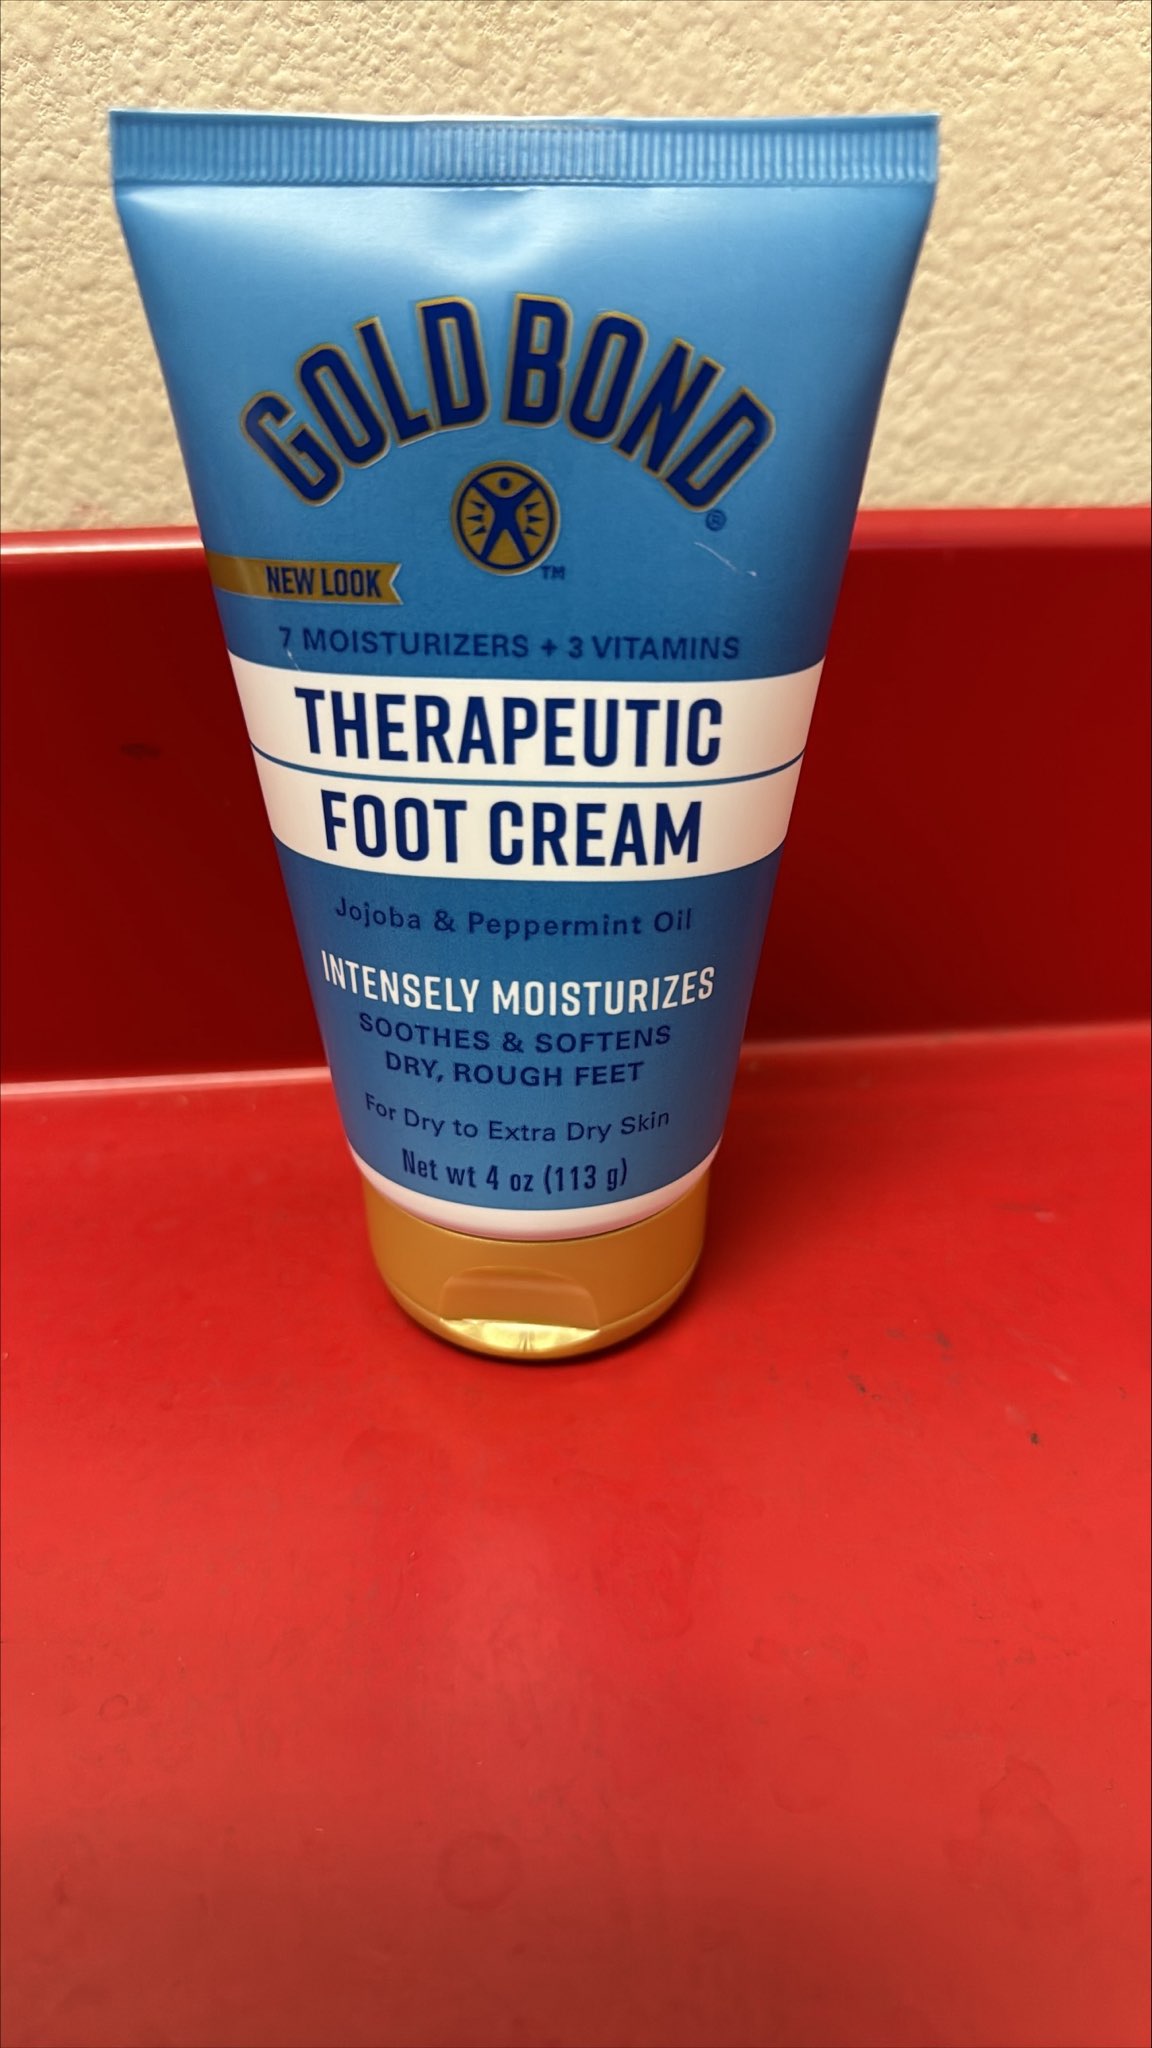 Gold Bond Therapeutic Foot Cream - 4 oz Tube By Chattem Drug & Chem Co